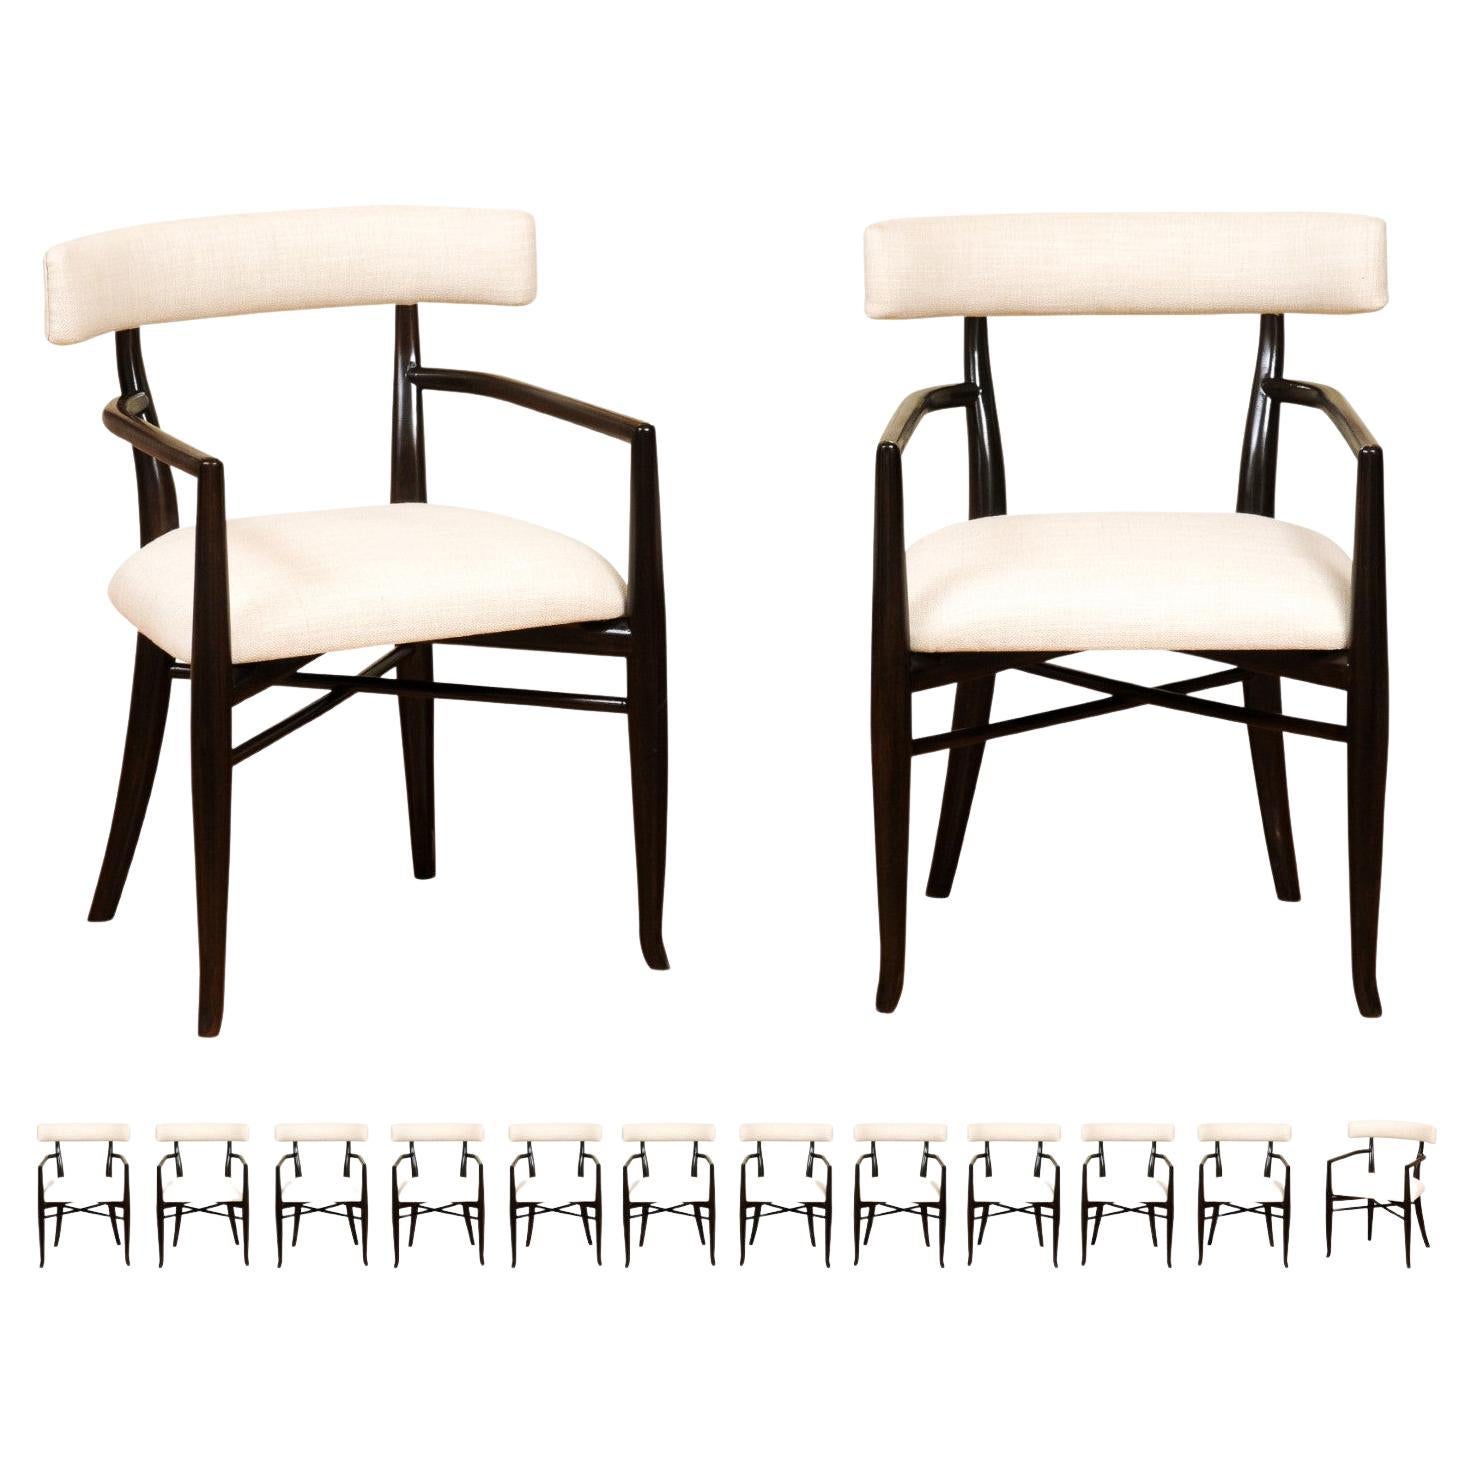 All ARMS, Stellar Set of 14 of Klismos Dining Chairs by Robsjohn-Gibbings For Sale